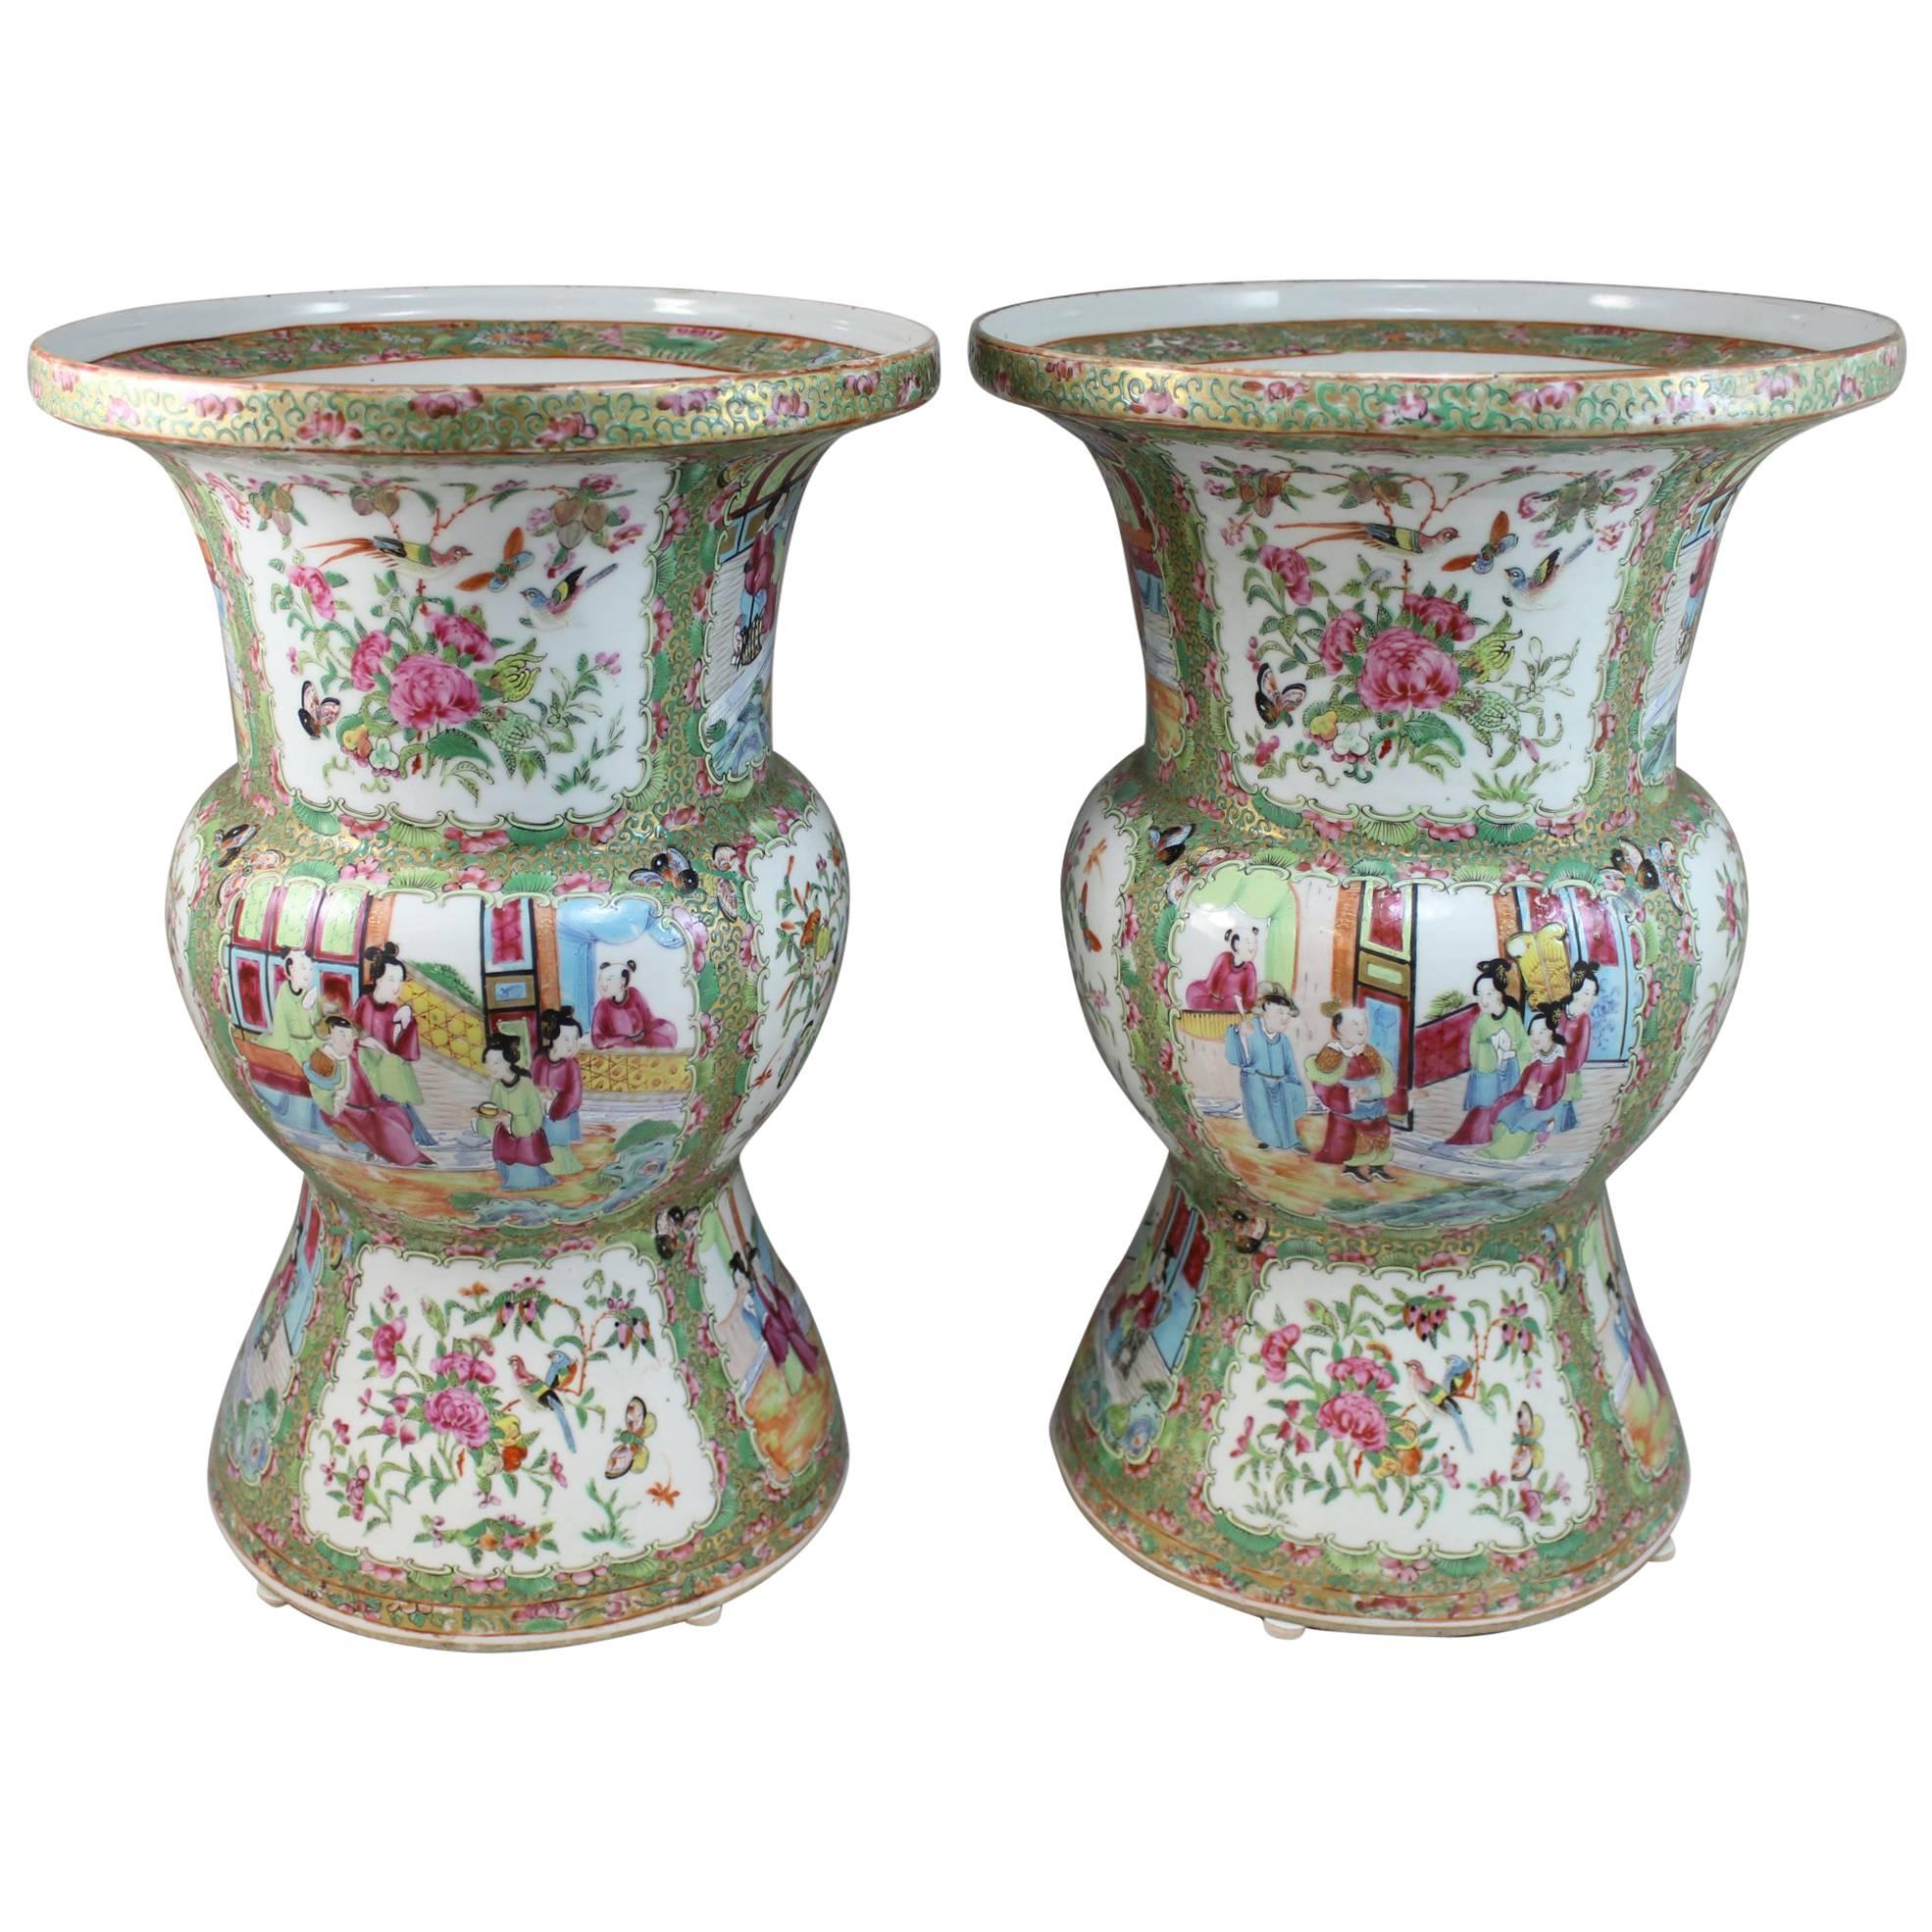 Pair of 19th Century Chinese Export Rose Medallion Ku Form Vases